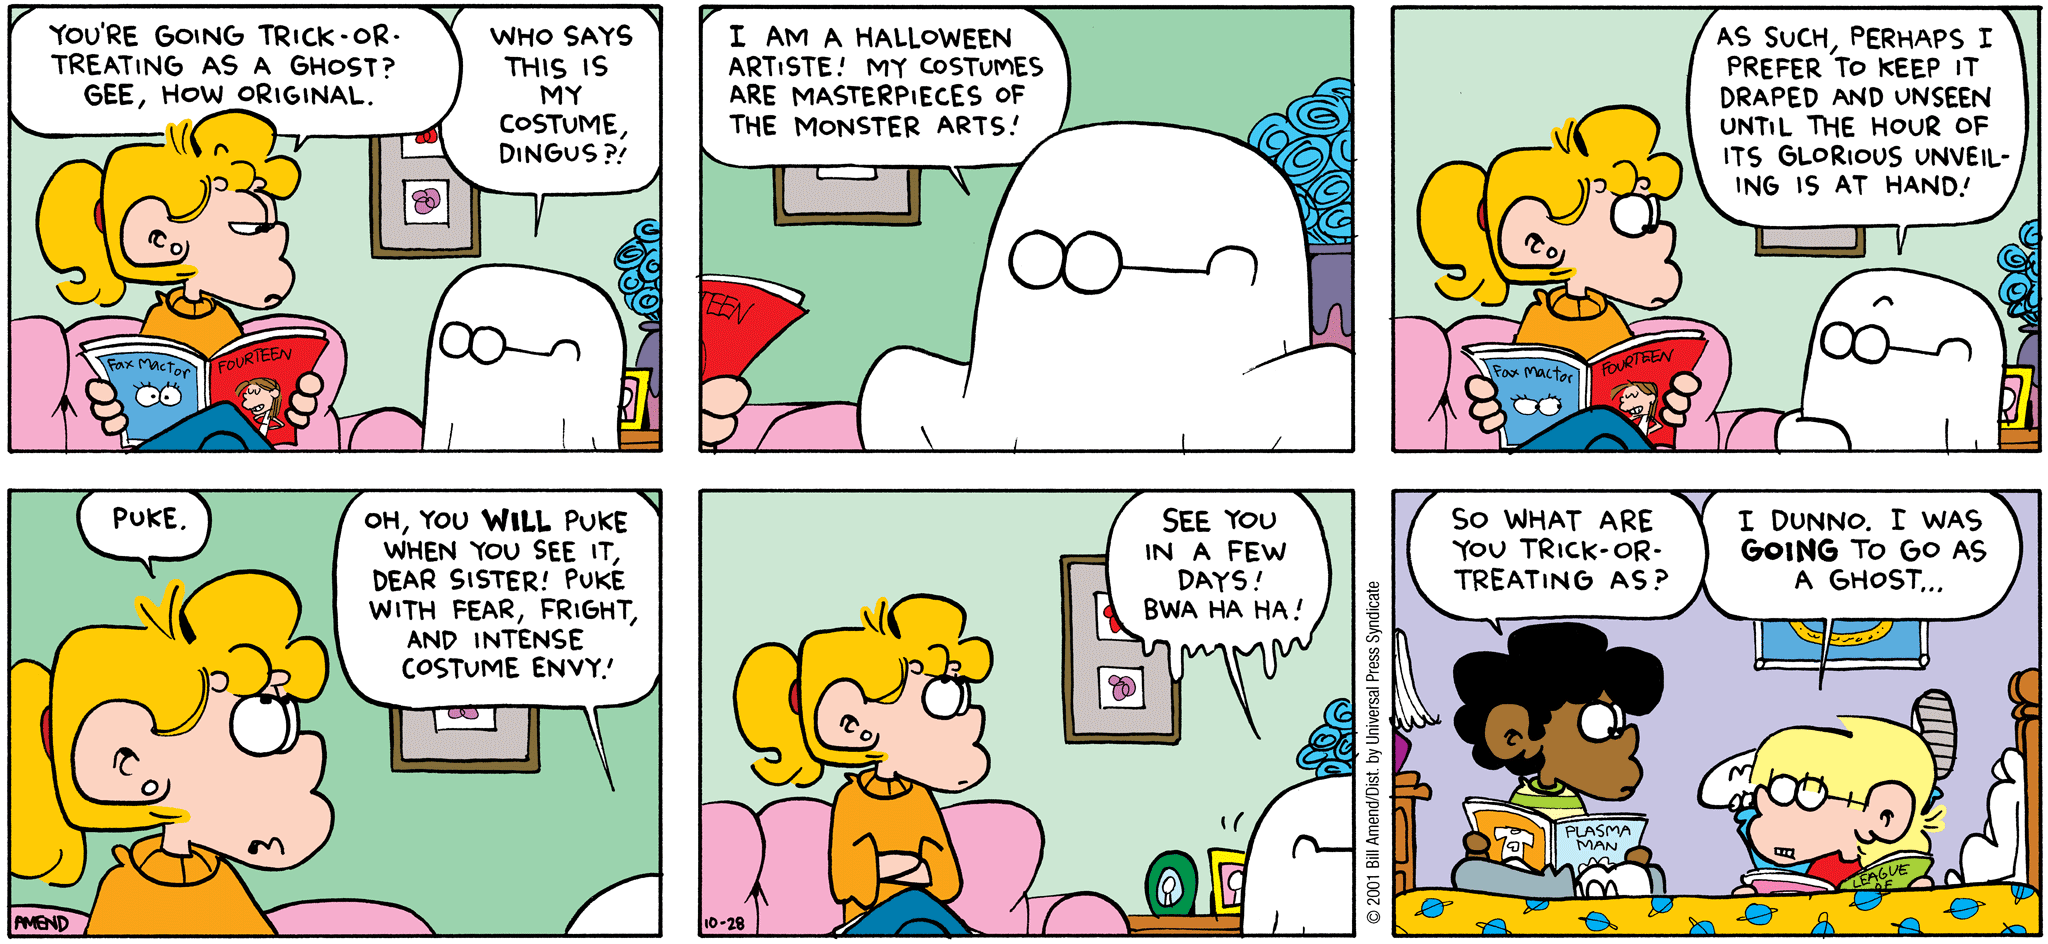 Halloween Comics - FoxTrot comic strip by Bill Amend - Published October 28, 2001 - Transcription: Paige Fox: You're going Trick-or-Treating as a ghost? Gee, how original. Jason Fox: Who says this is my costume, dingus?! I am a Halloween artiste! My costumes are masterpieces of the monster arts! As such, perhaps I prefer to keep it draped and unseen until the hour of it's glorious unveiling is at hand! Paige Fox: Puke. Jason Fox: Oh, you will puke when you see it, dear sister! Puke with fear, fright and intense costume envy! See you in a few days! Bwa ha ha! Marcus Jones: So what are you trick-or-treating as? Jason Fox: I dunno, I was going to go as a ghost.....